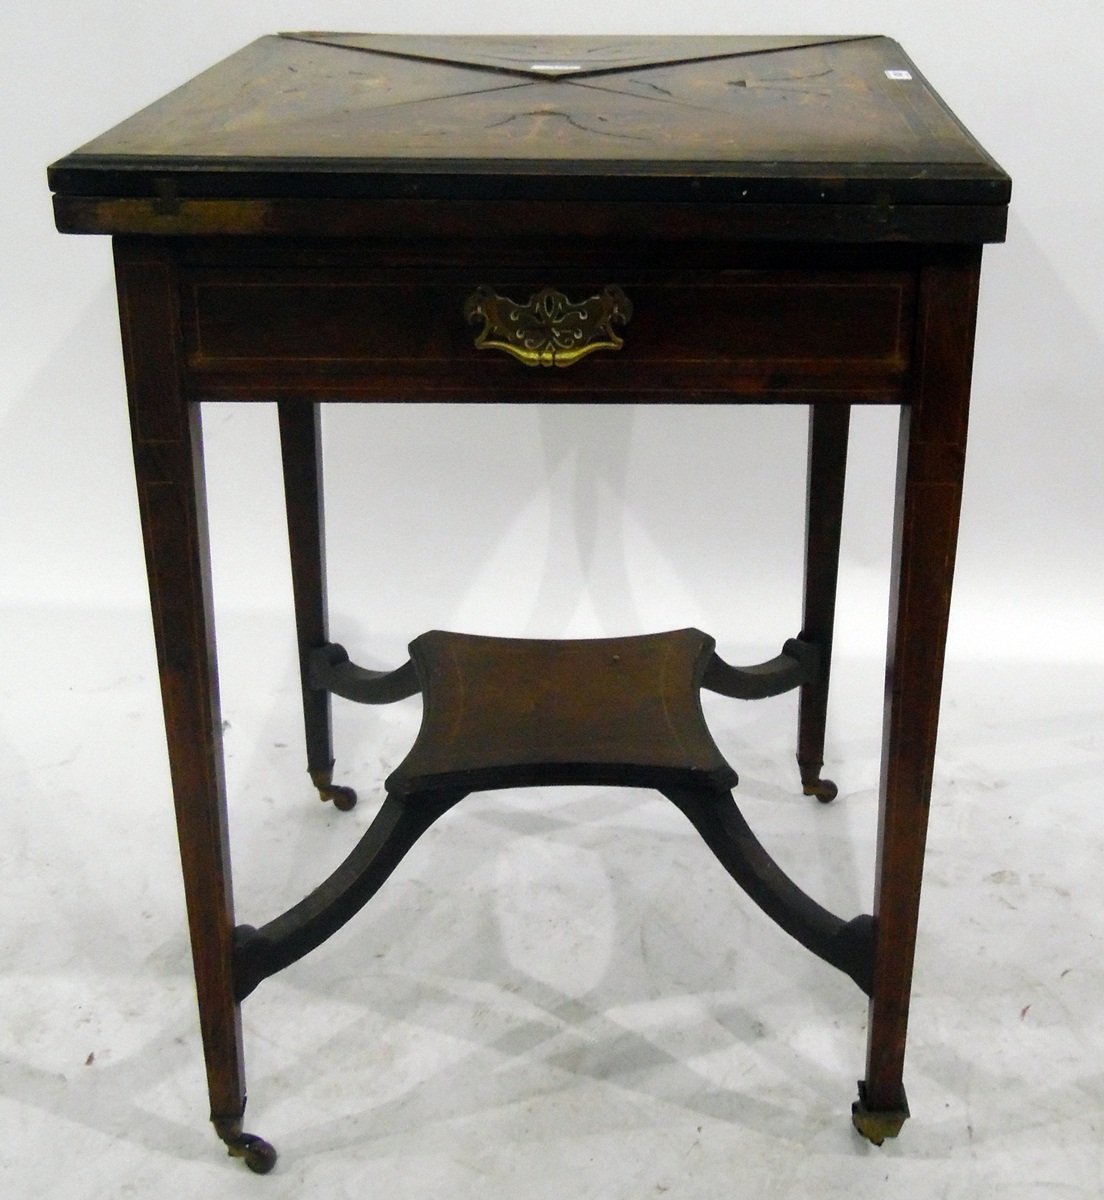 19th century walnut card table with inlaid fold-out top revealing coin holders and inset green